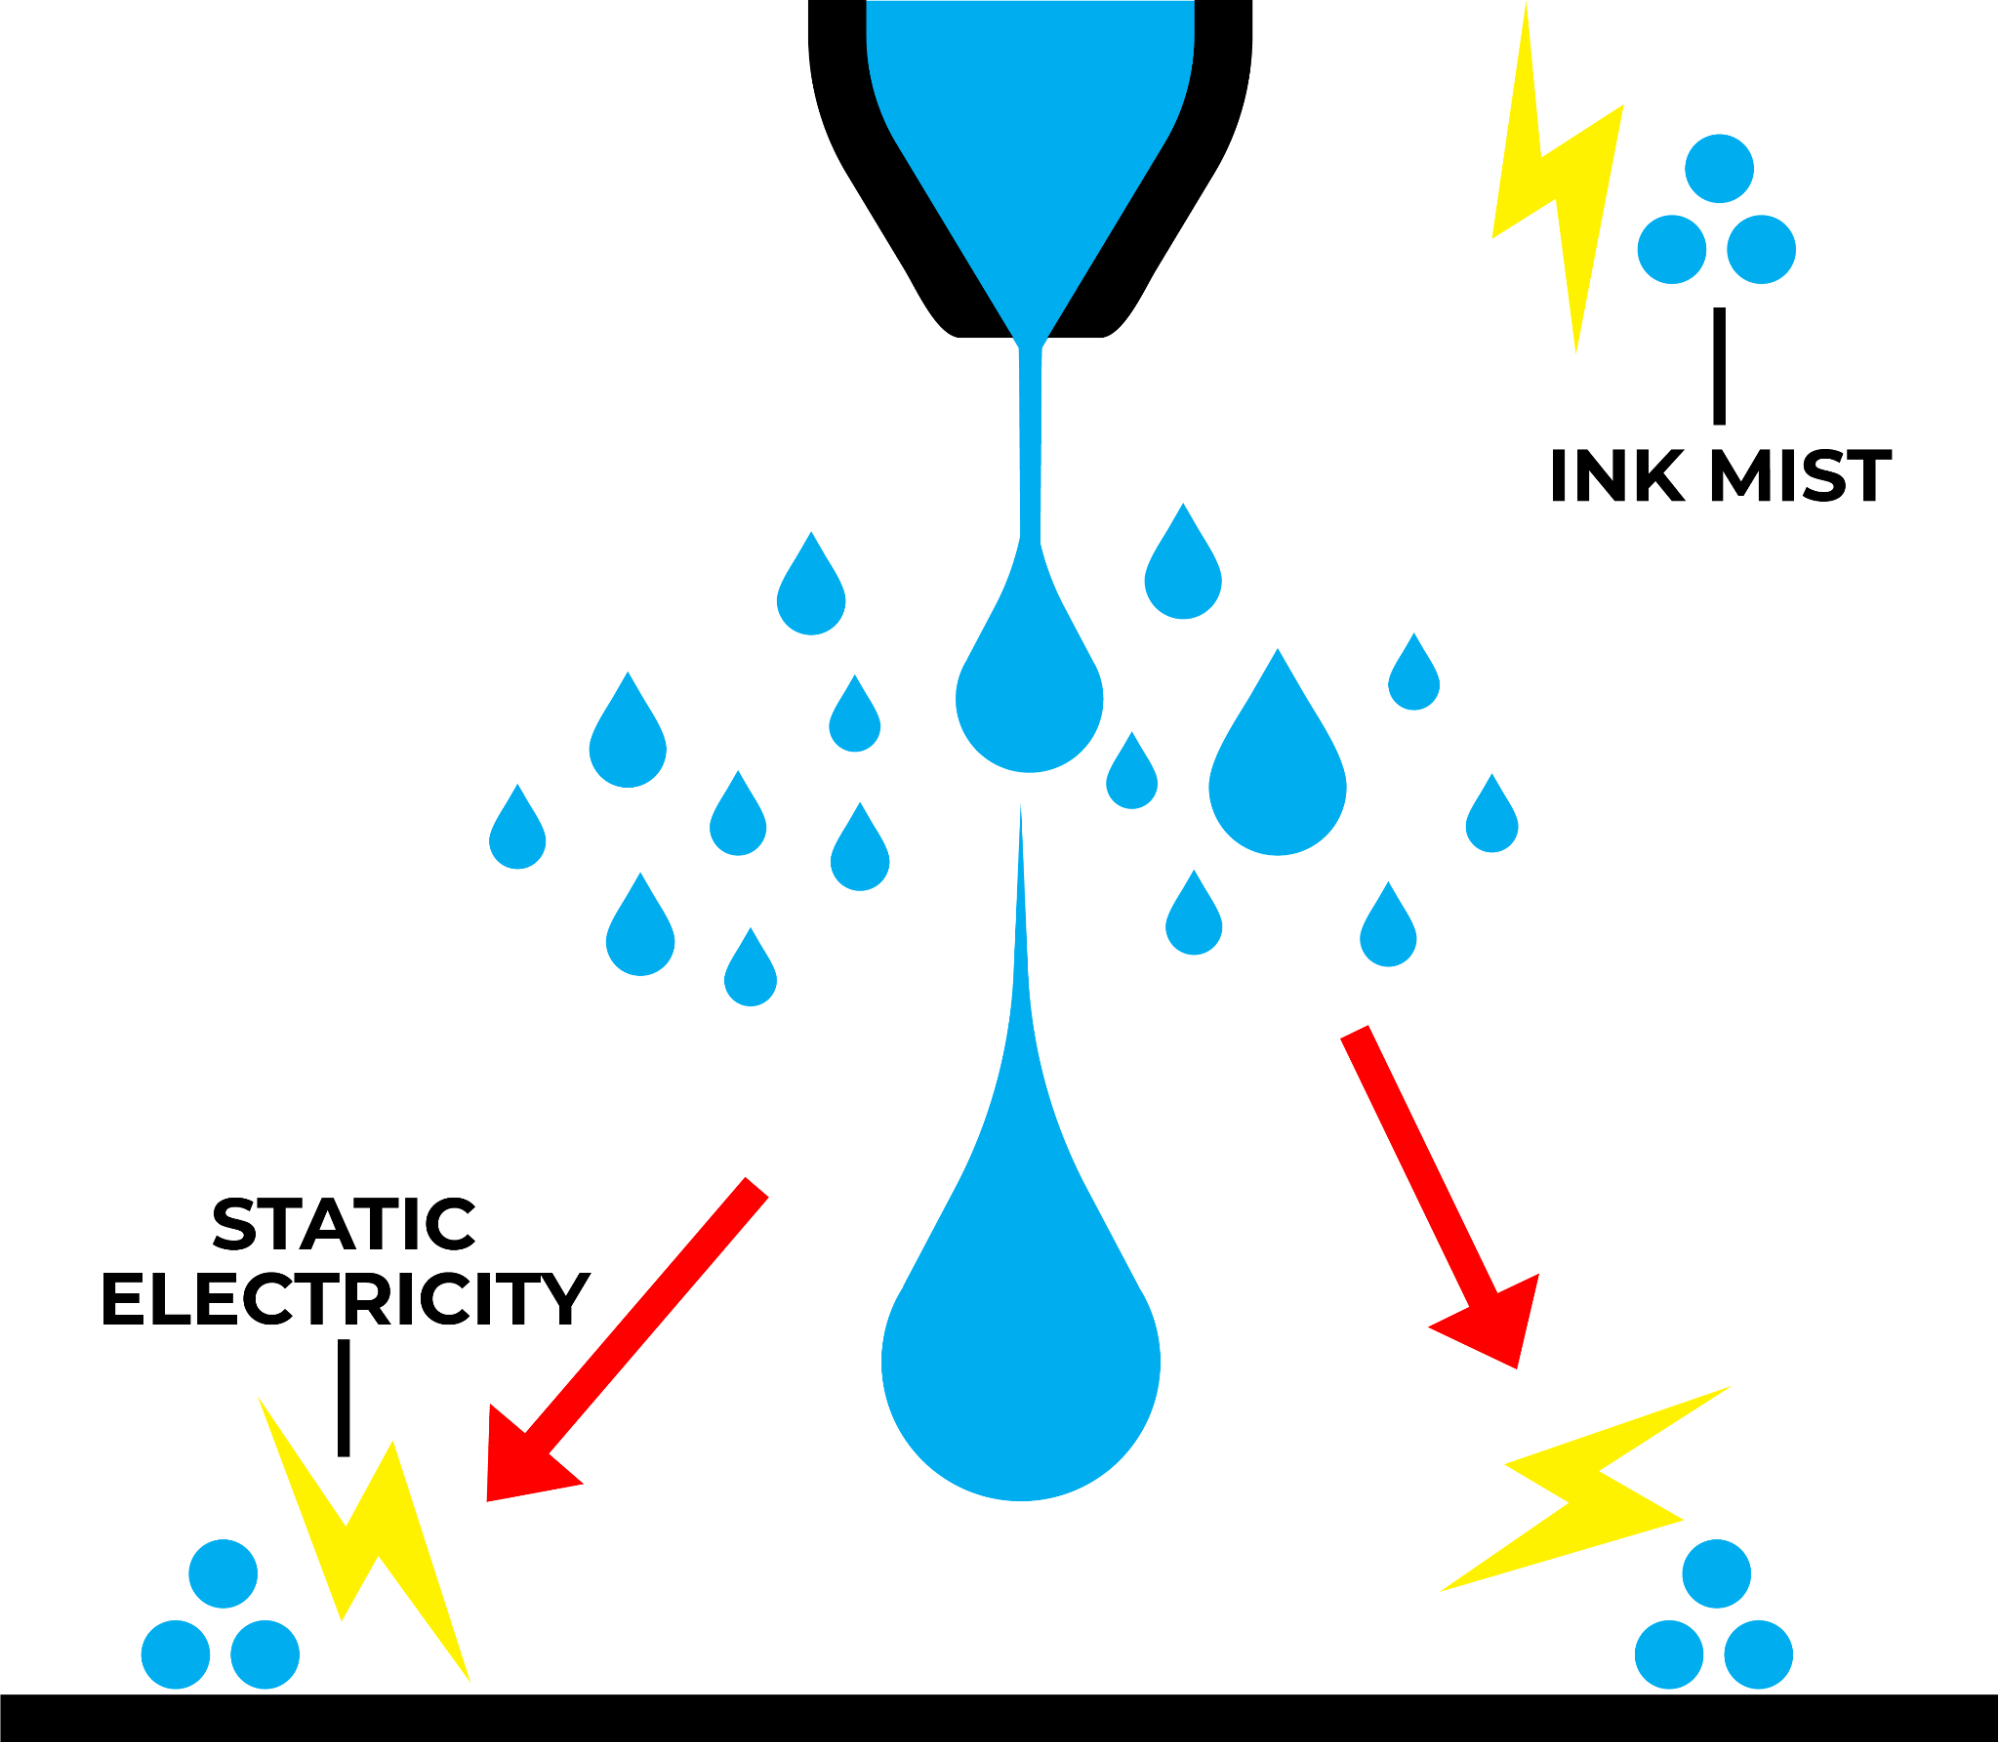 Image demonstrating static electicity and ink mist